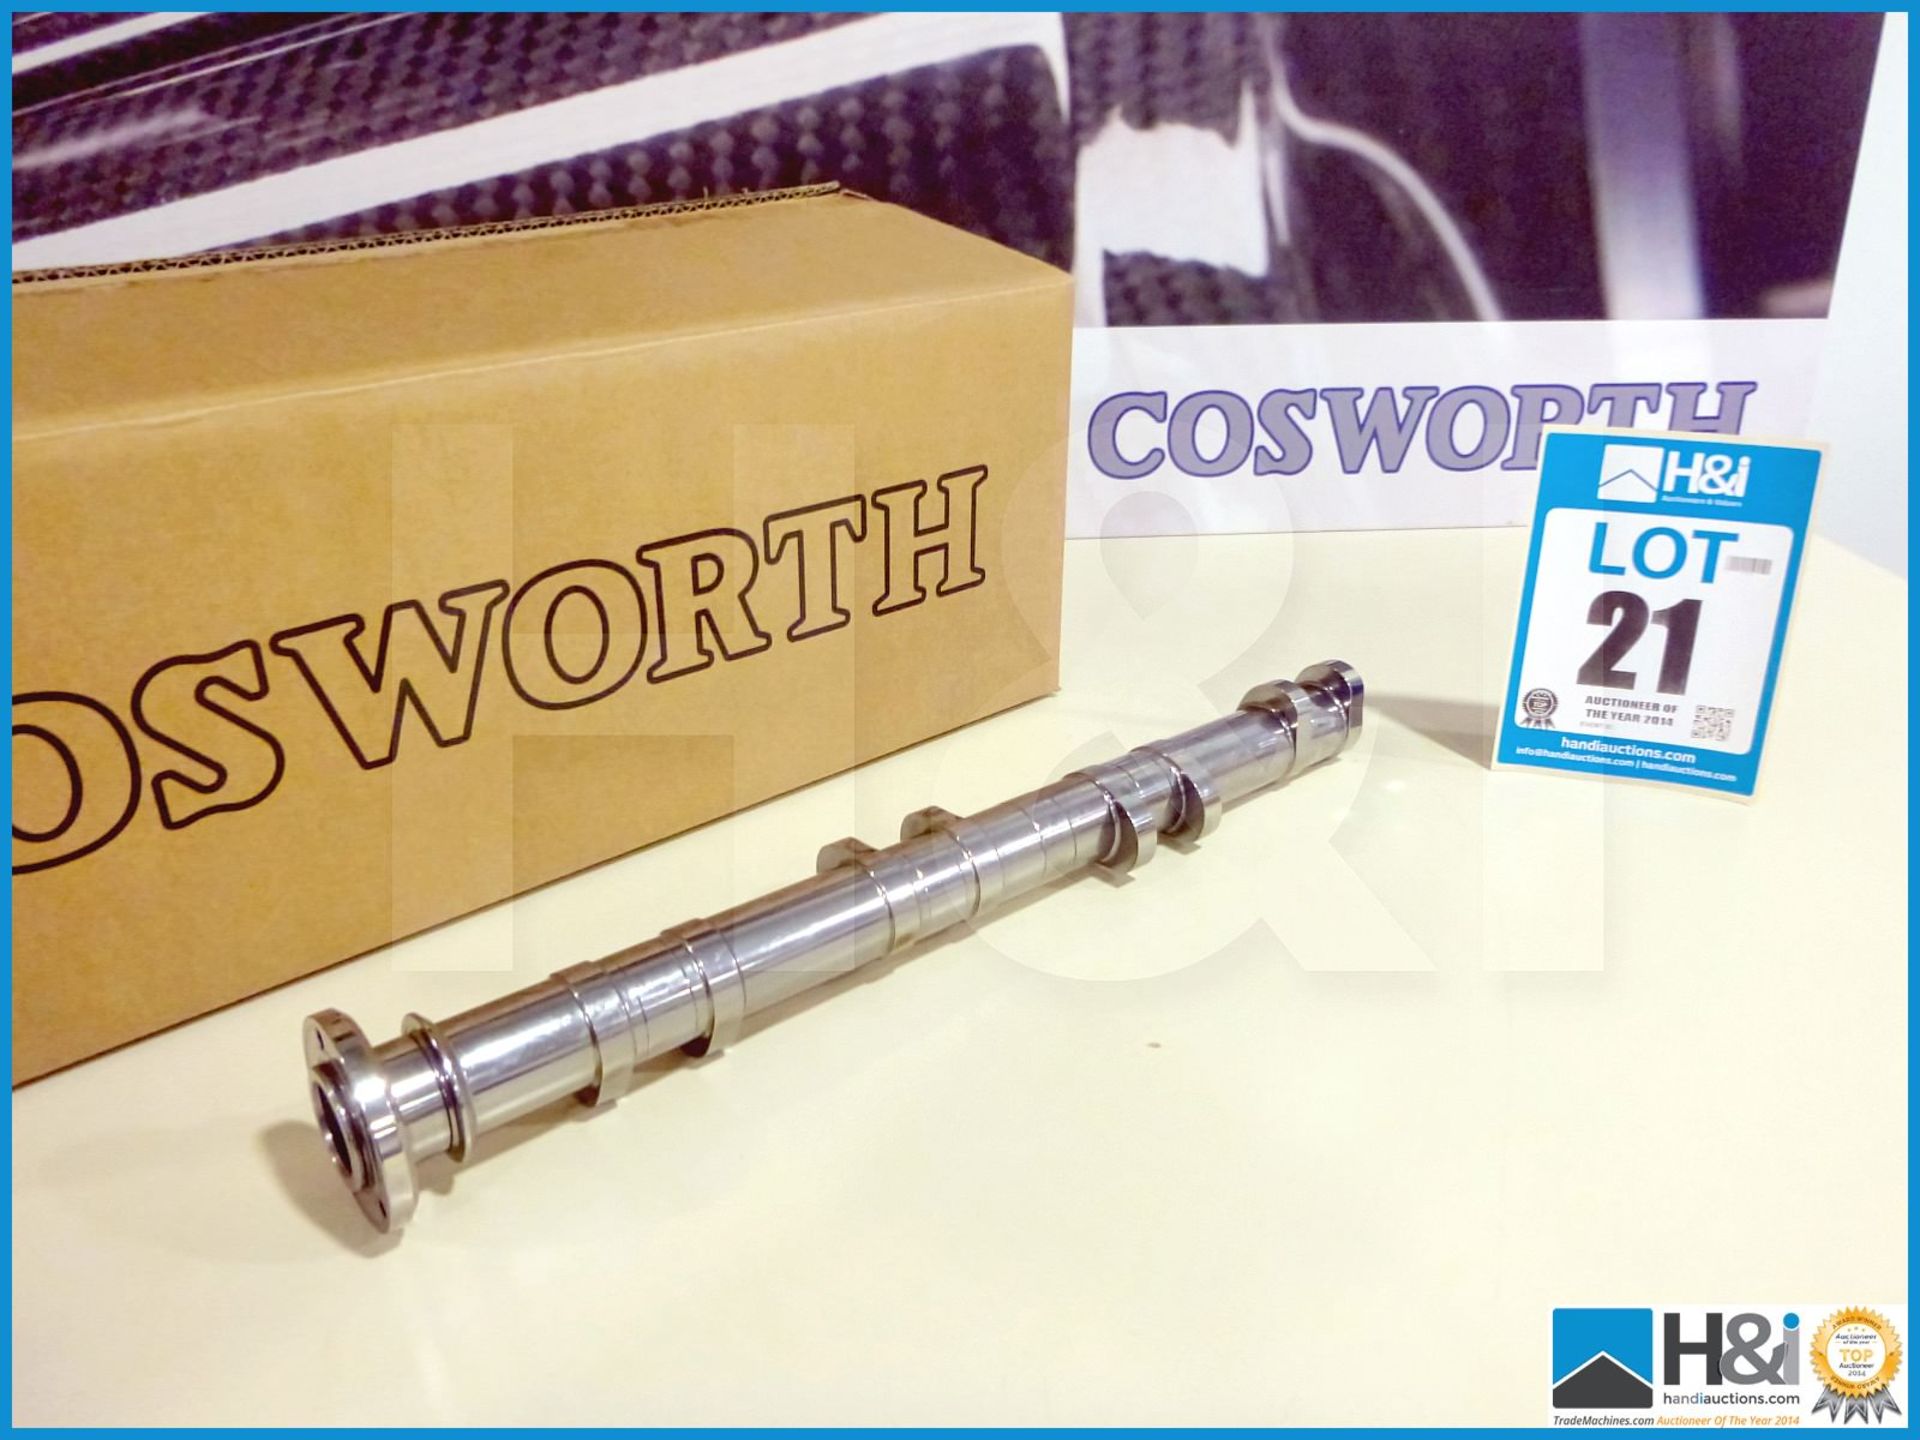 10 off Cosworth LH exhaust camshafts XG4 1-5. Appx lot value over GBP 10,000 -- MC:XG0044 CILN:20